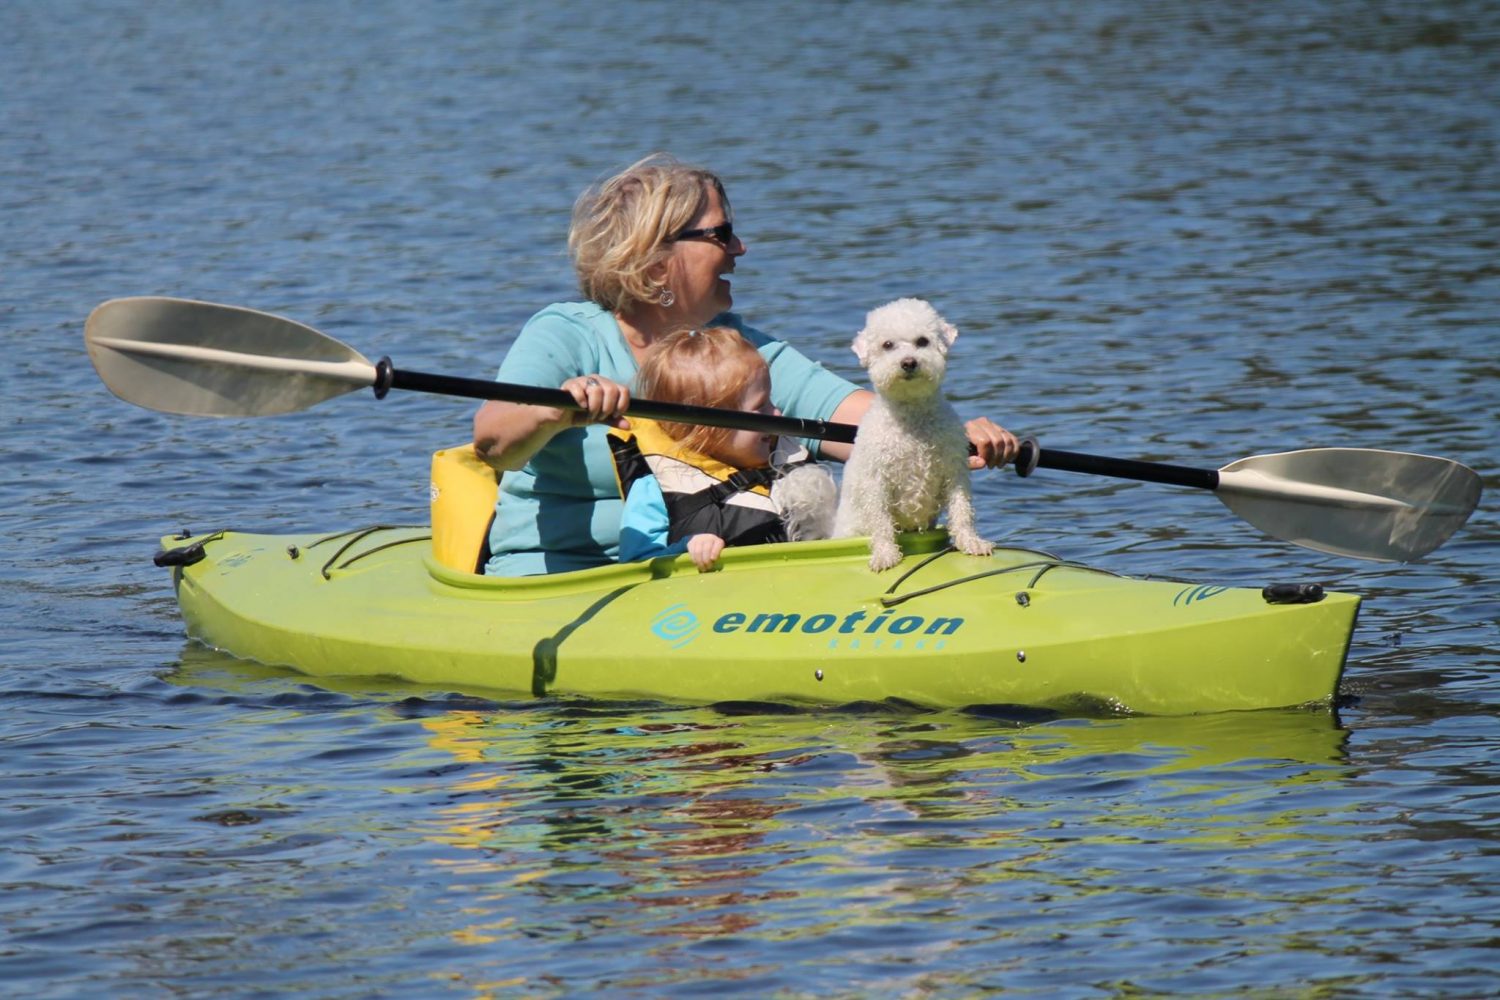 Have a Great Day Paddling With Our Kayak Rentals on Lake Wallenpaupack